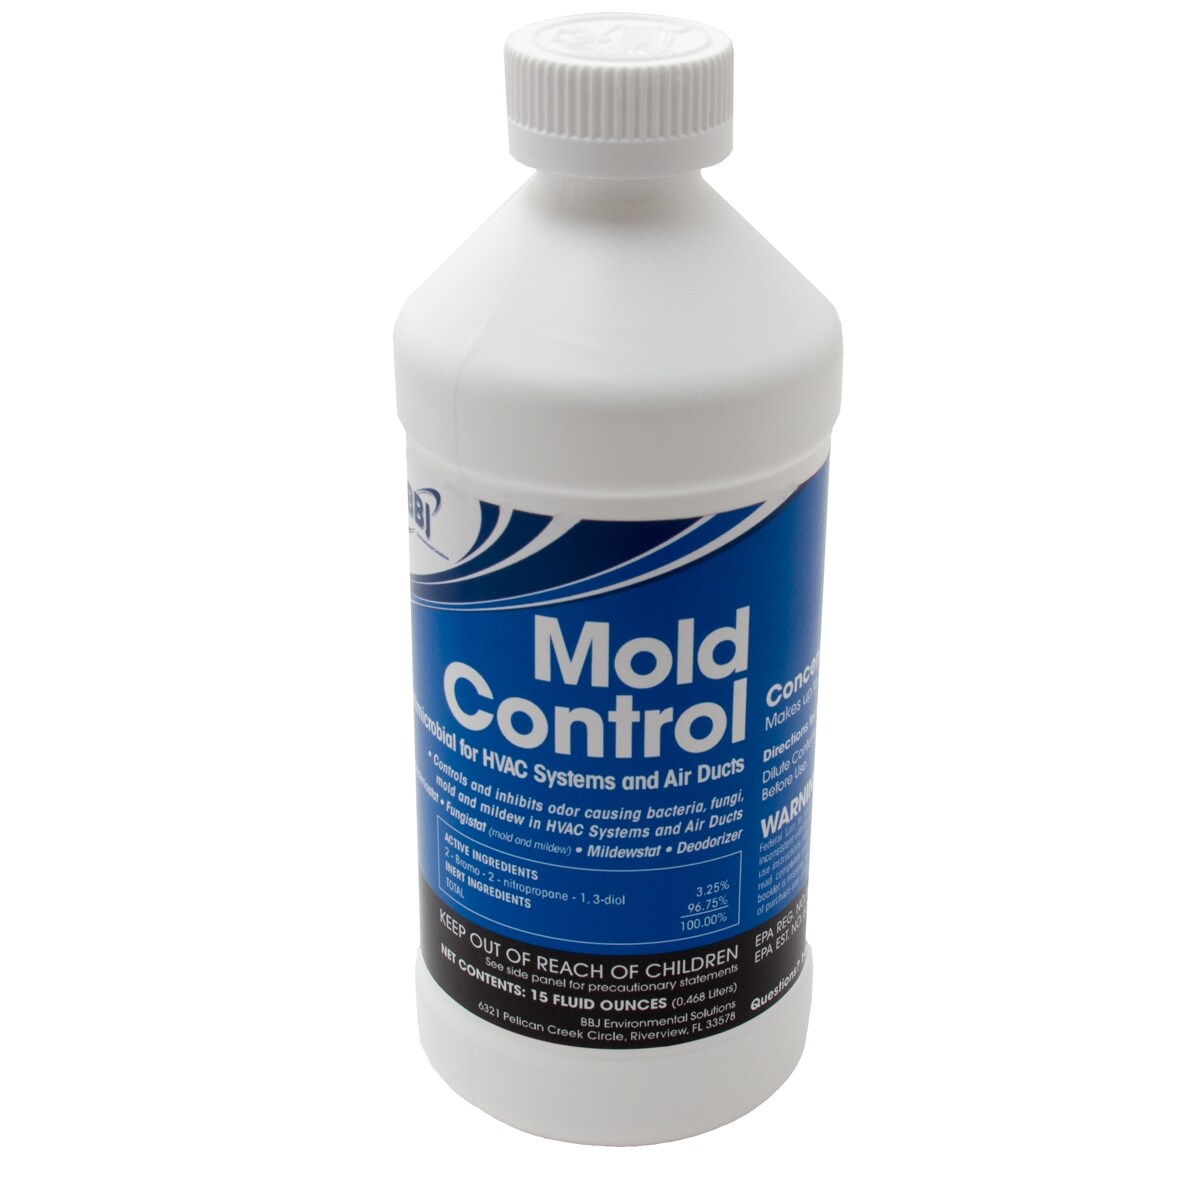 Coil Cure Liquid - the Disinfectant Cleaner for HVAC Systems